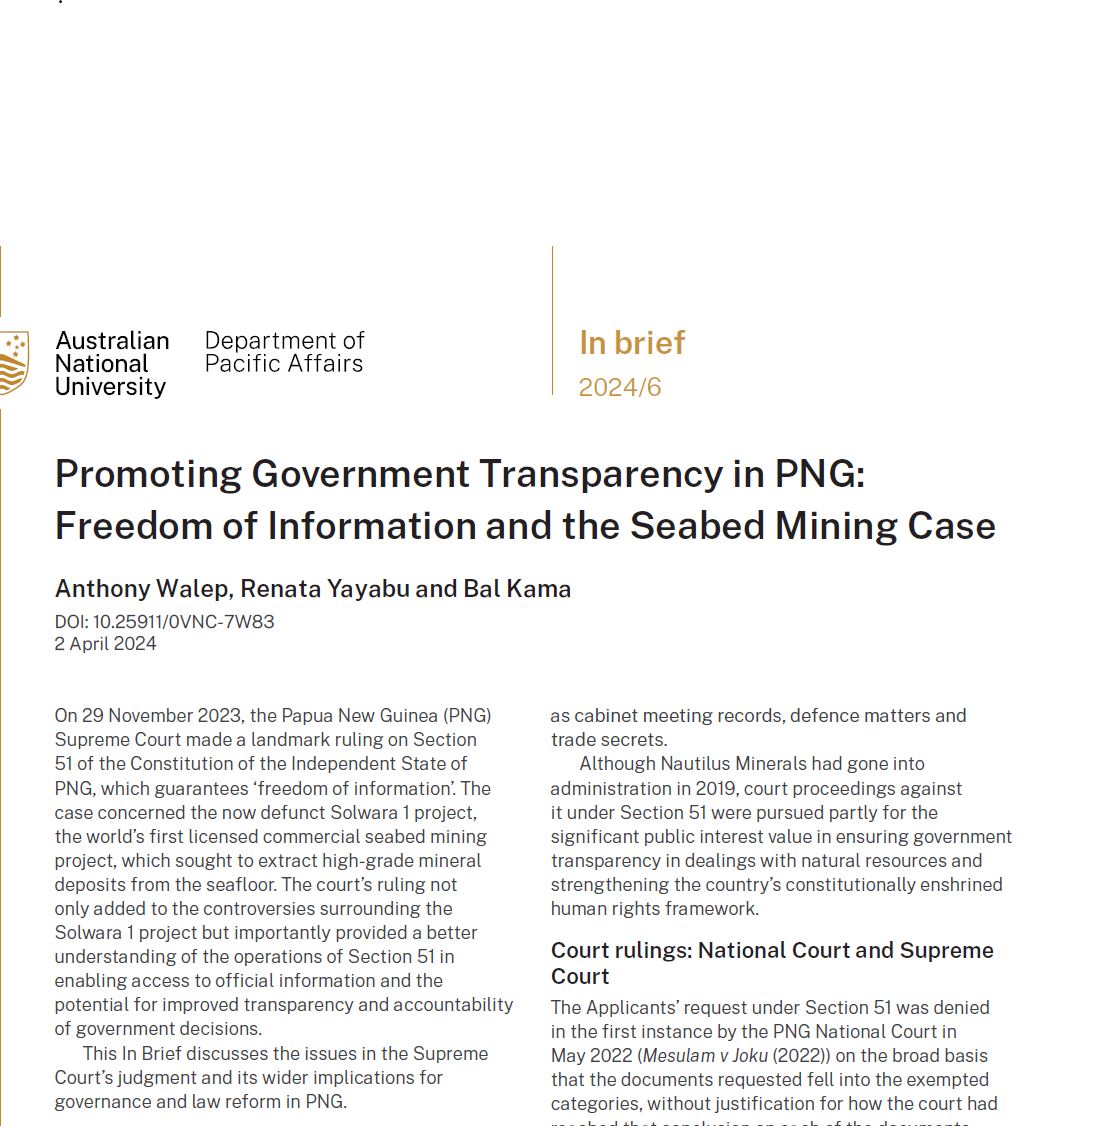 PNG Constitution grants the freedom of information with potential for better transparency. But not well utilised. A landmark 2023 Supreme Court decision on Seabed mining may signal change. Walep, Yayabu & I provide a brief analysis. @anudpa @ANUBellSchool openresearch-repository.anu.edu.au/handle/1885/31…